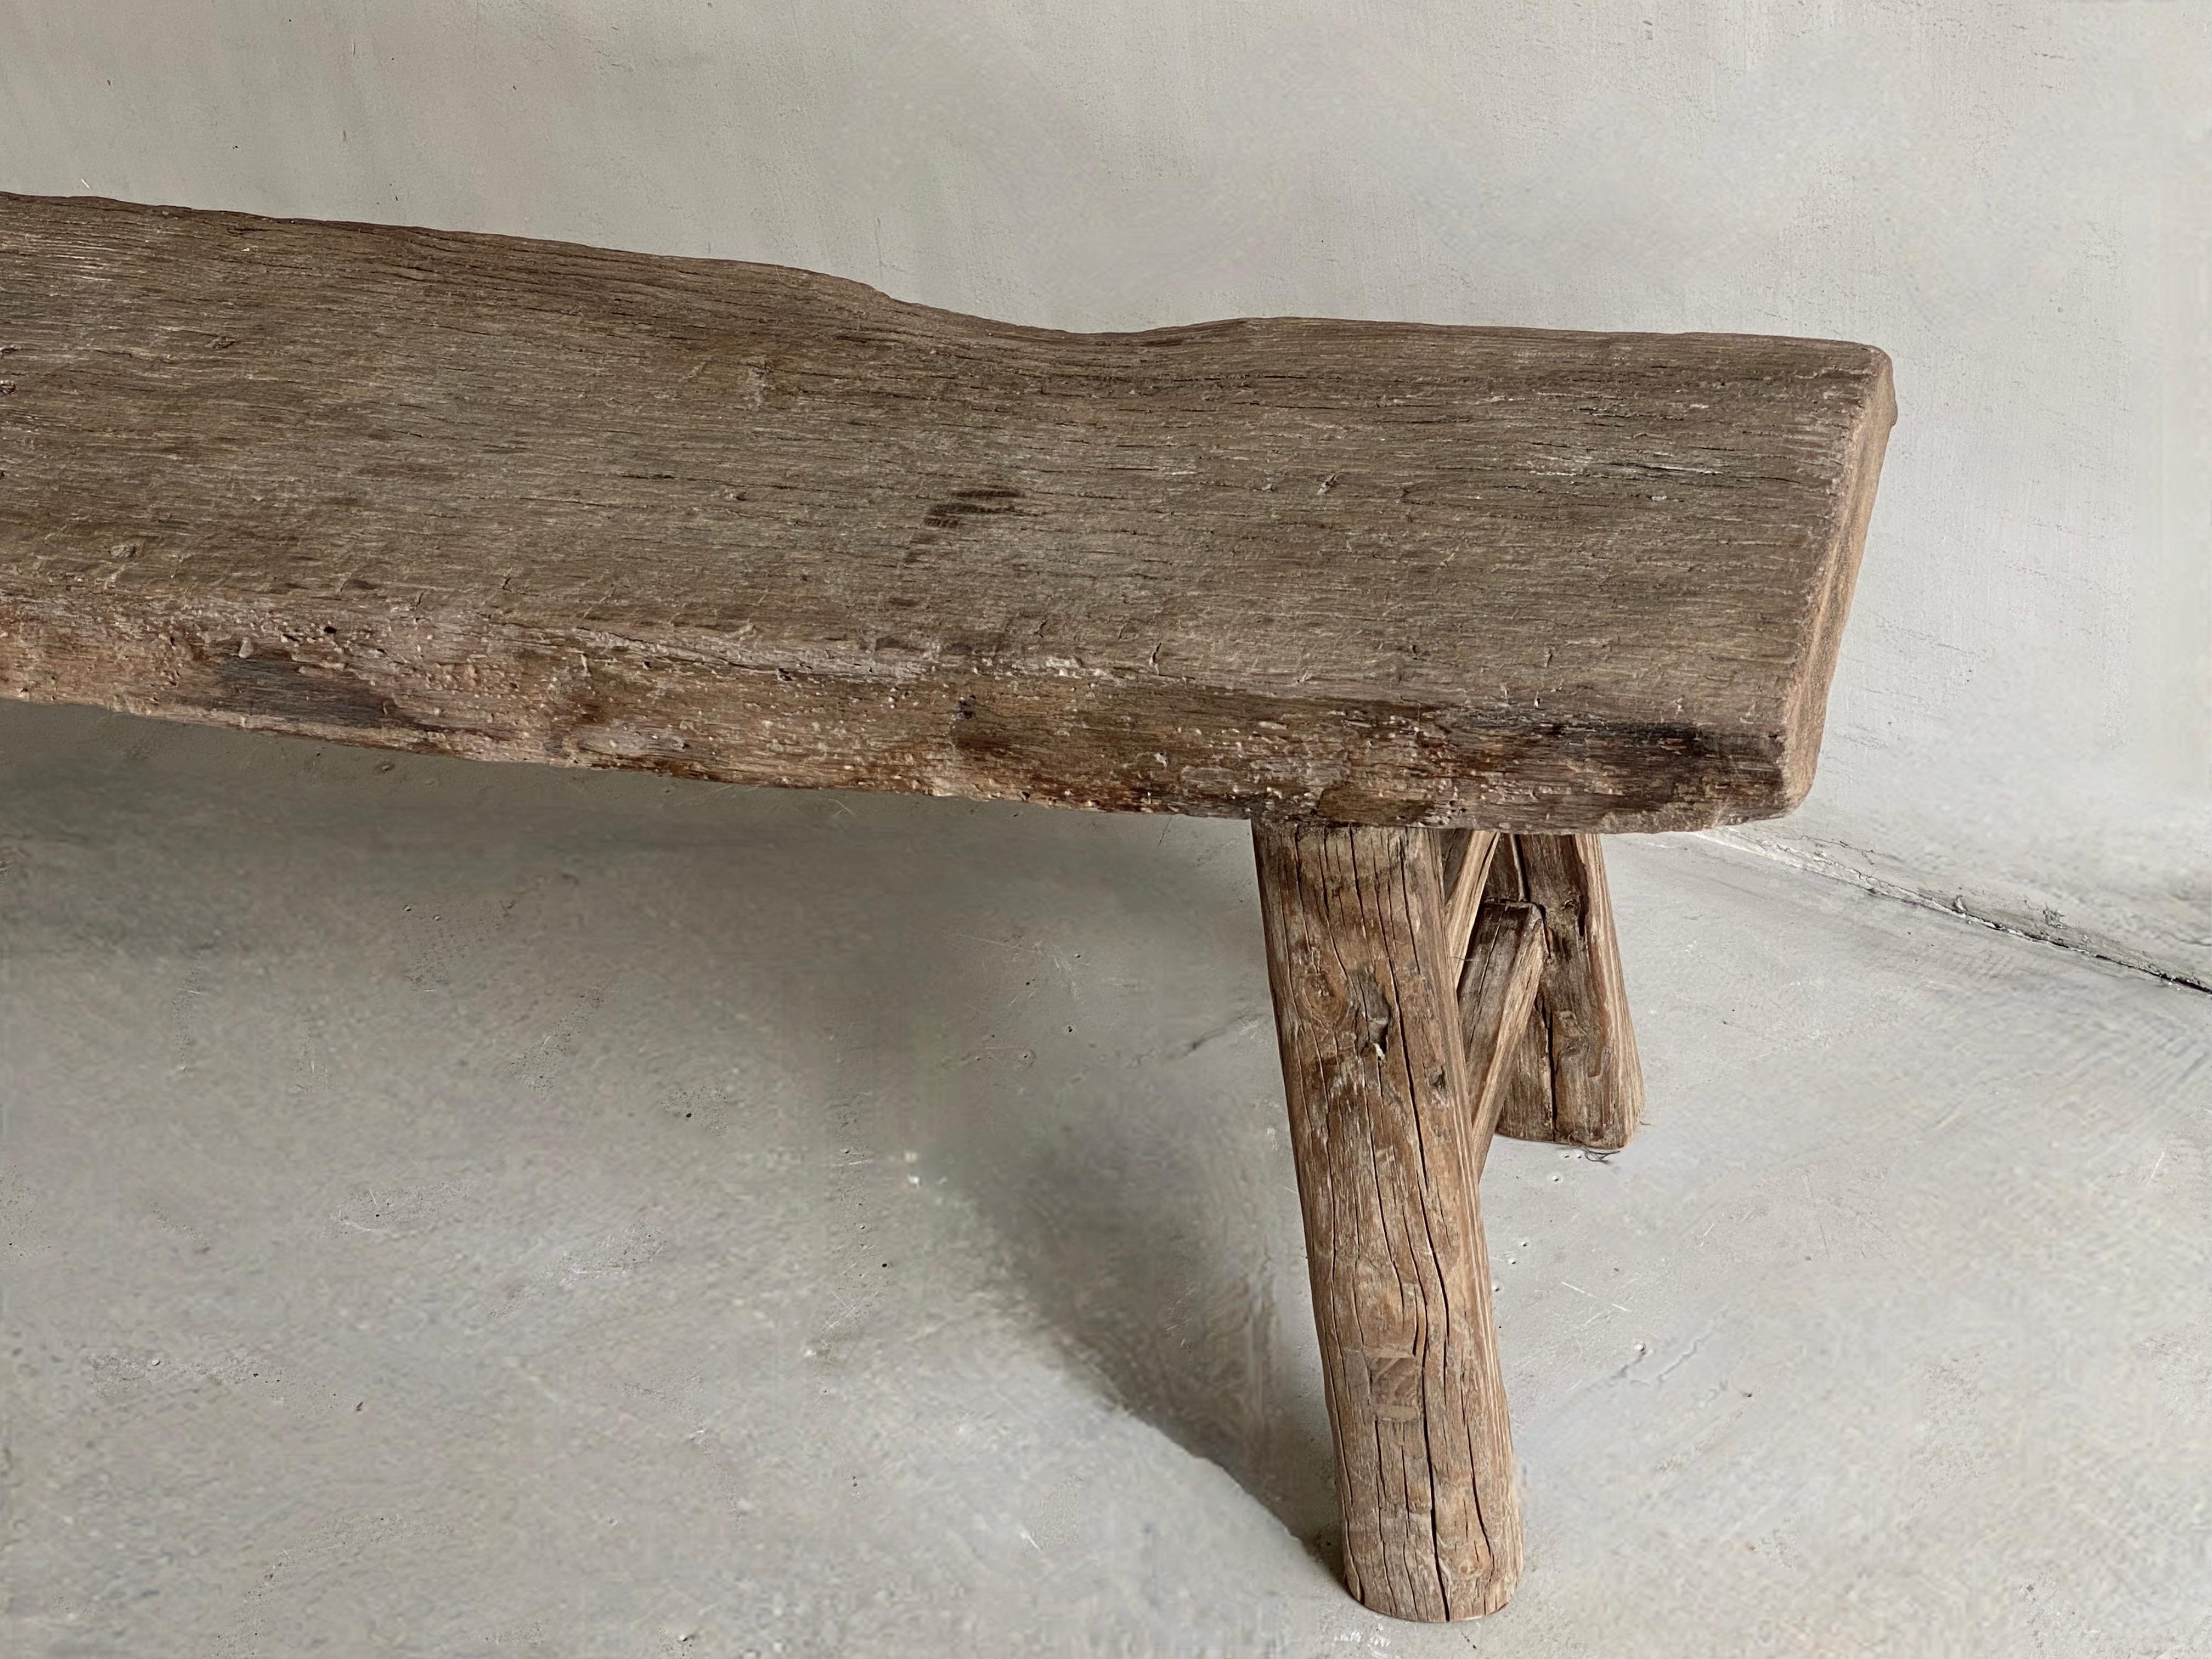 Primitive 19th century oak bench.
The tablet has a nice curving due to being hand cut.
Due to age, the bench has grayed nicely.
Real craftsmanship.

We ship worldwide, securely packaged with insurance.
Do not hesitate to ask for a personalized rate.